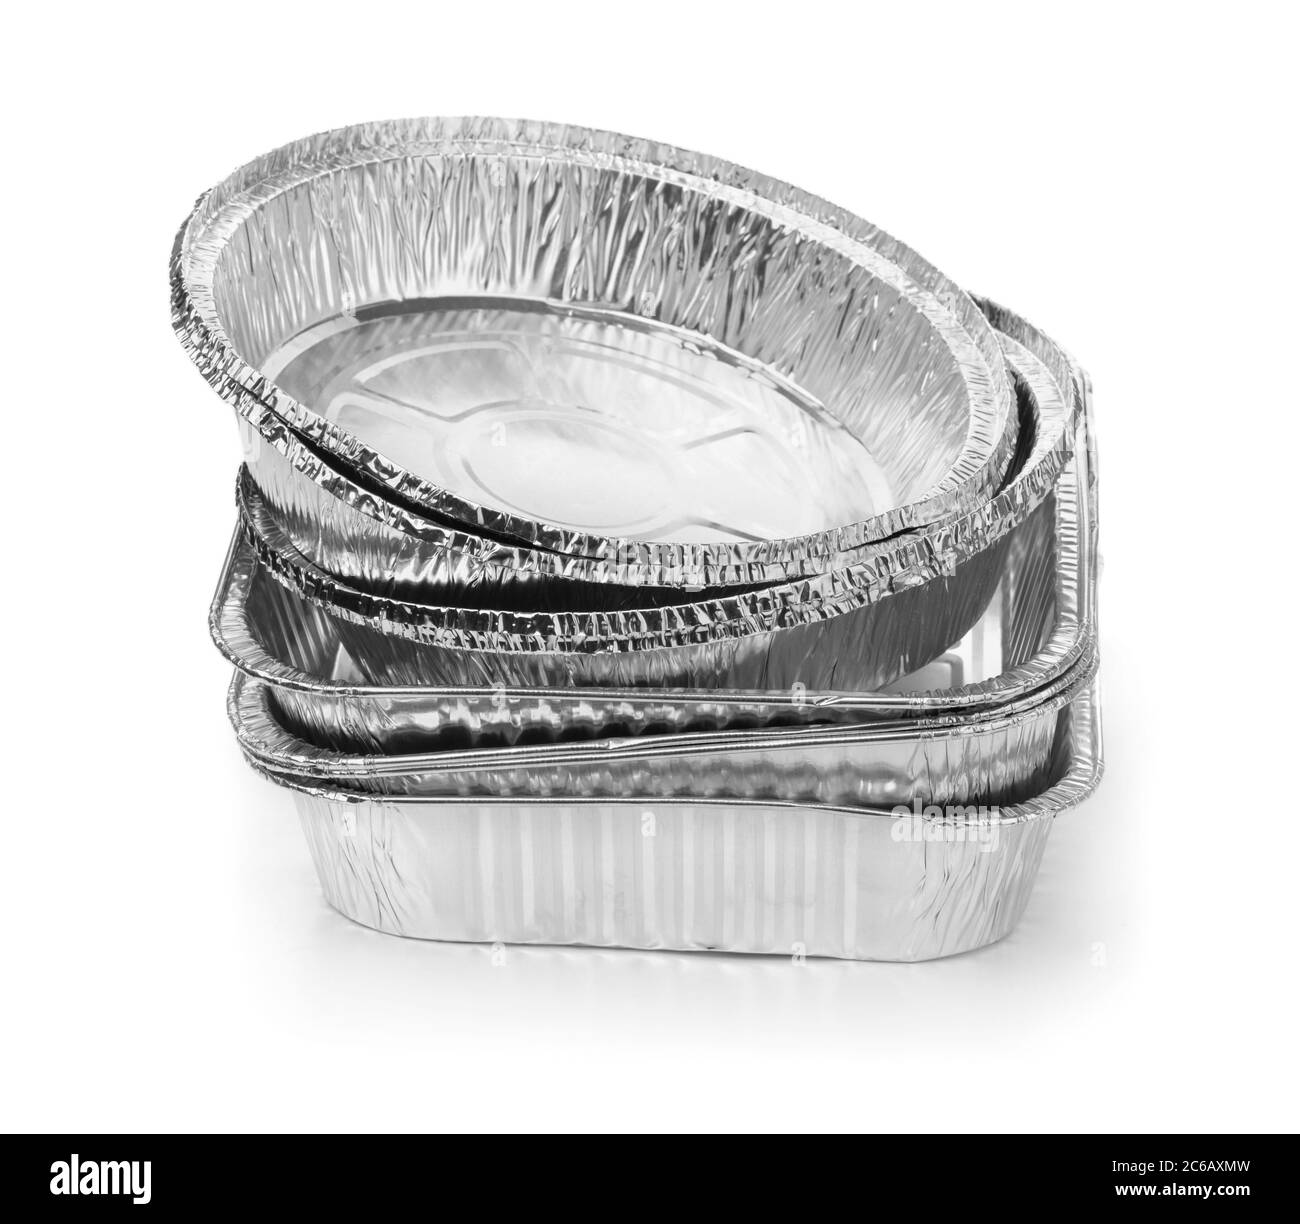 https://c8.alamy.com/comp/2C6AXMW/group-of-various-disposable-aluminium-foil-baking-dishes-isolated-on-white-2C6AXMW.jpg